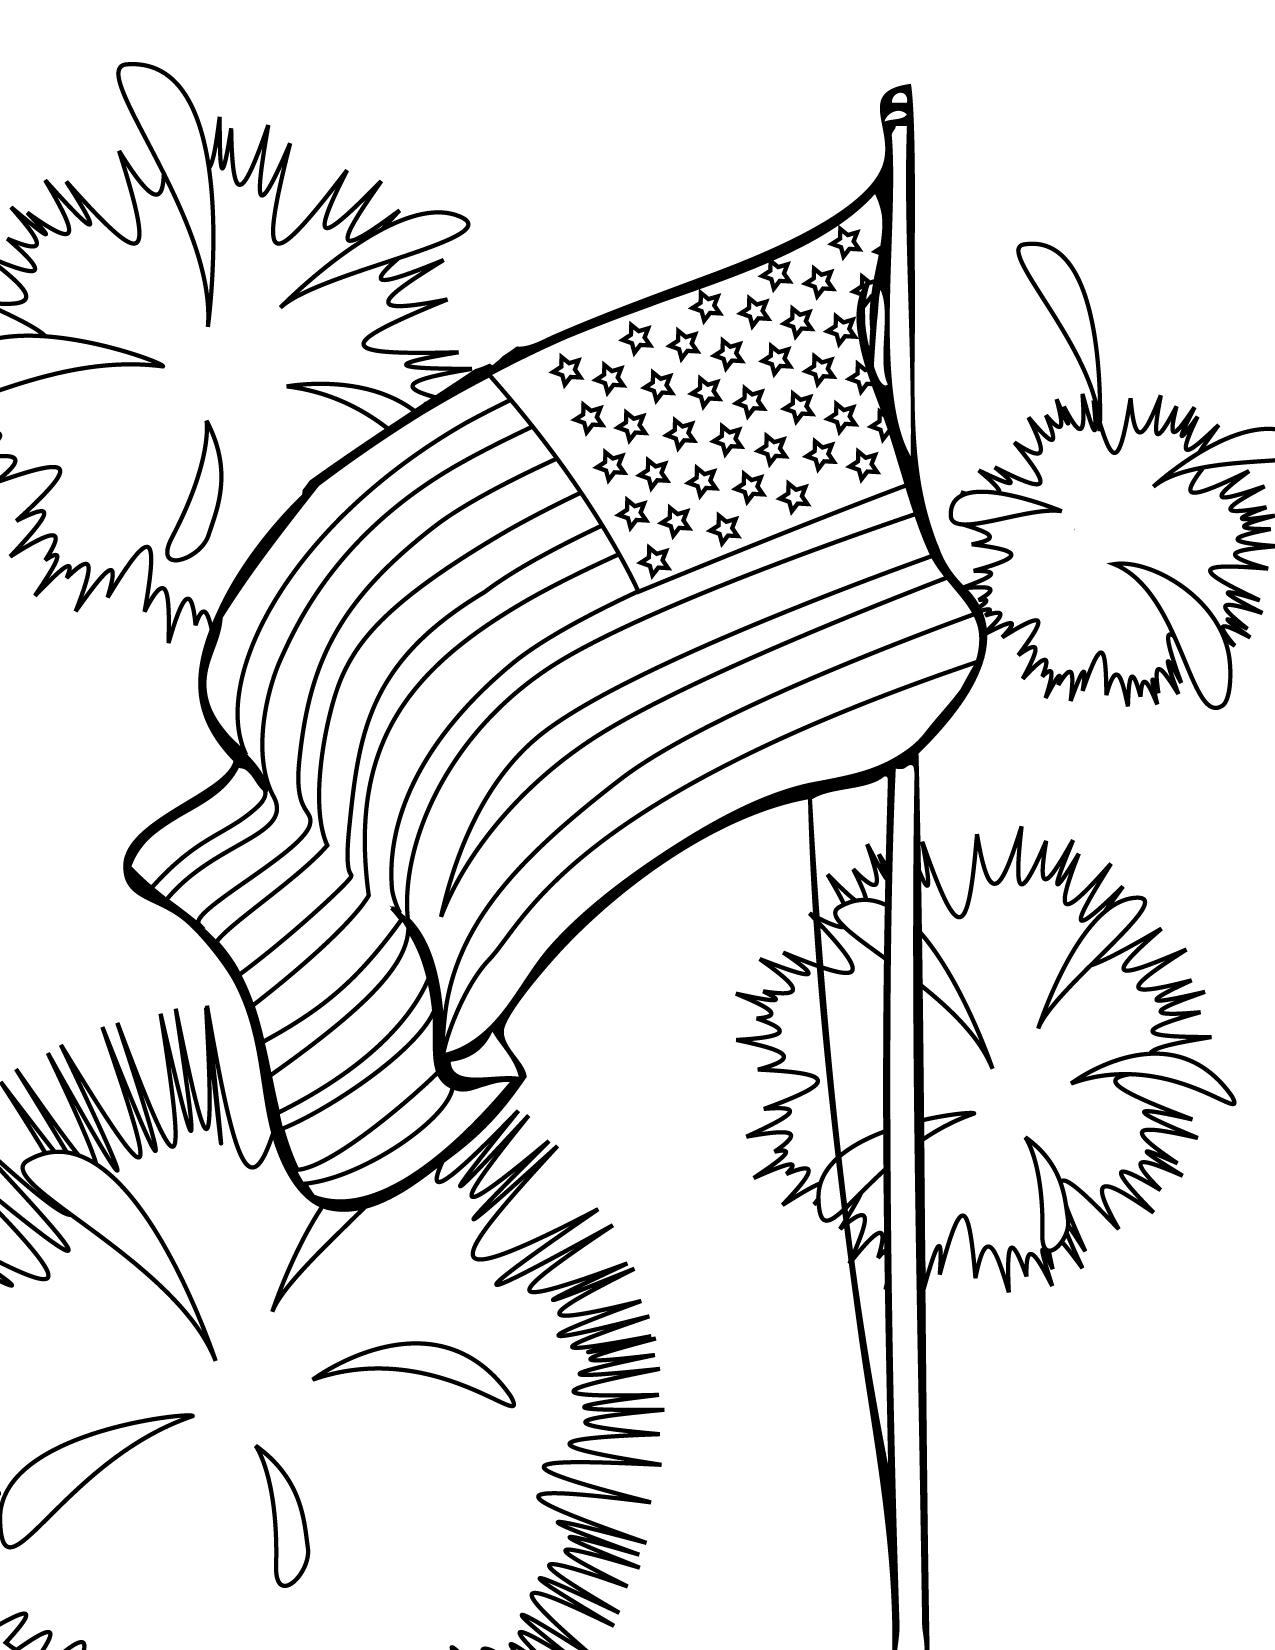 4th-of-july-coloring-pages | wallpapers55.com - Best Wallpapers ...